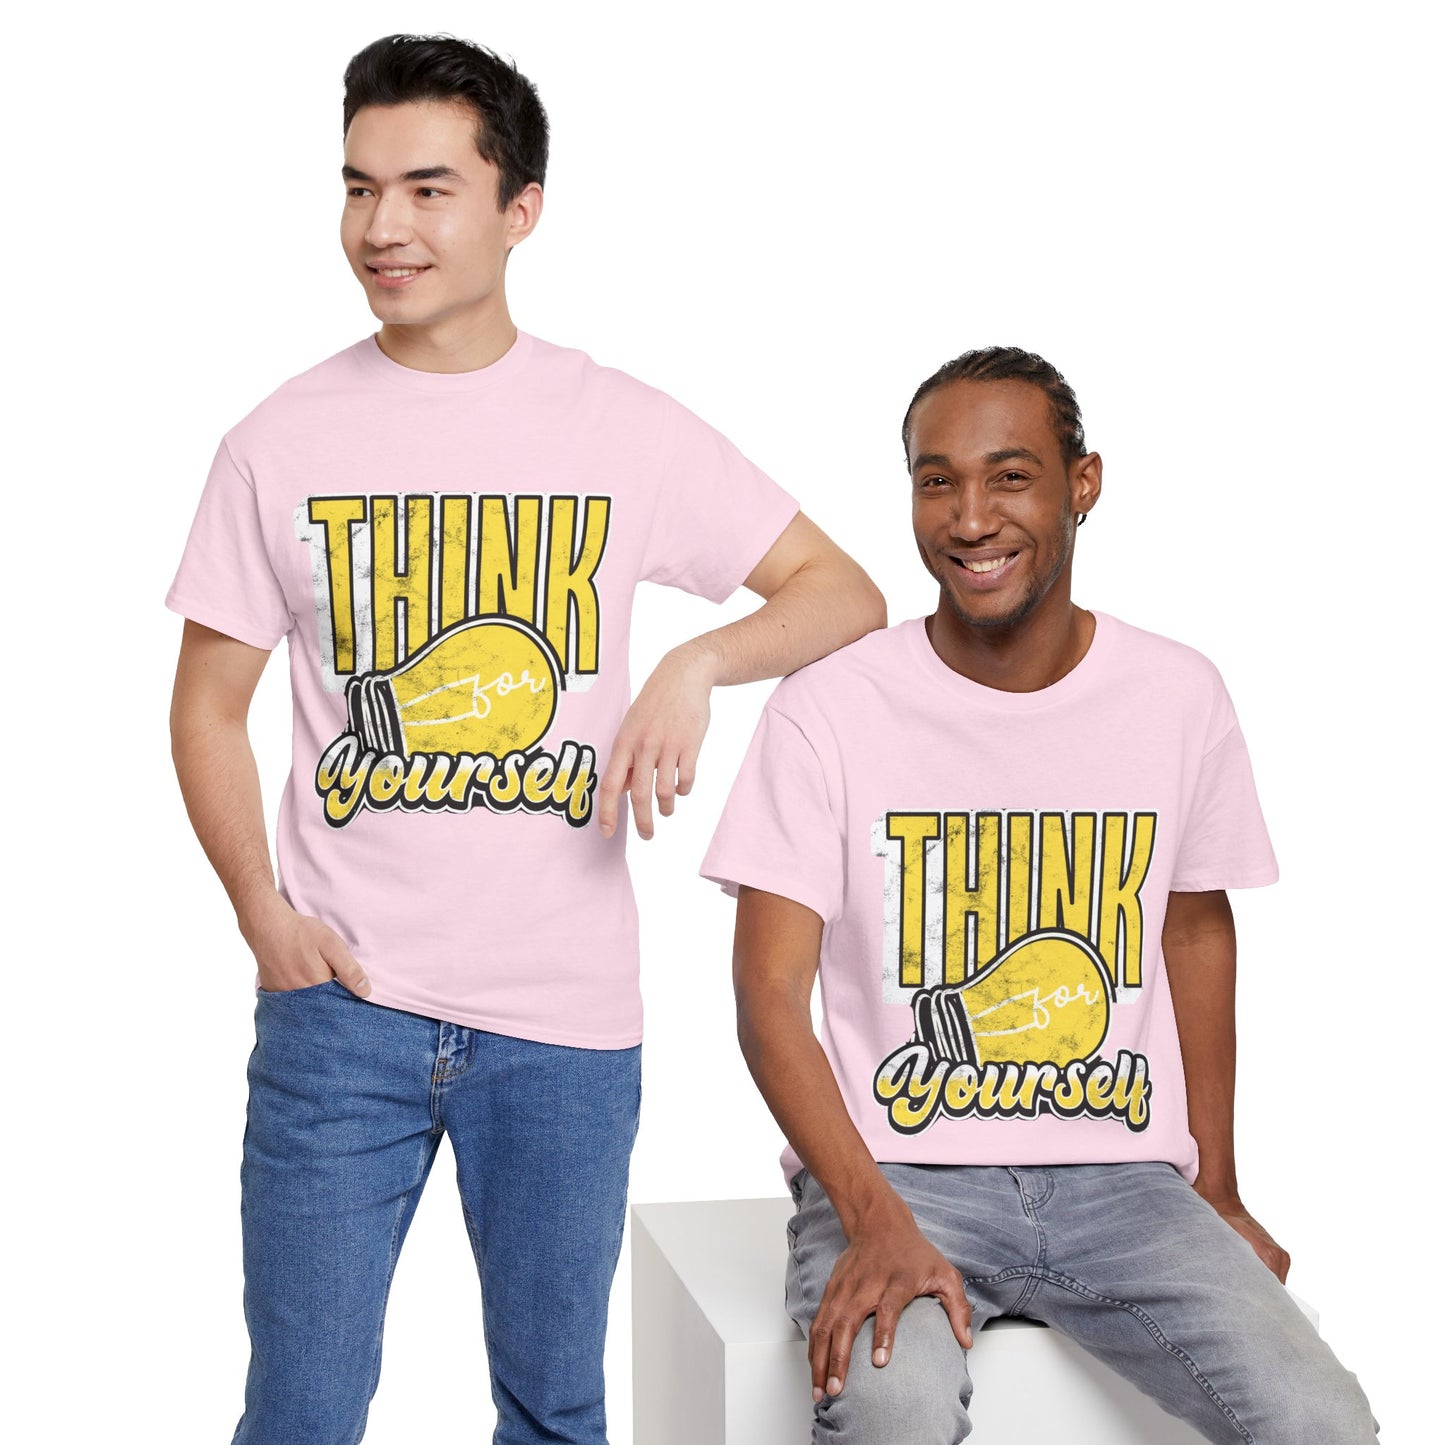 The Truth Finder T-Shirt: Think for yourself